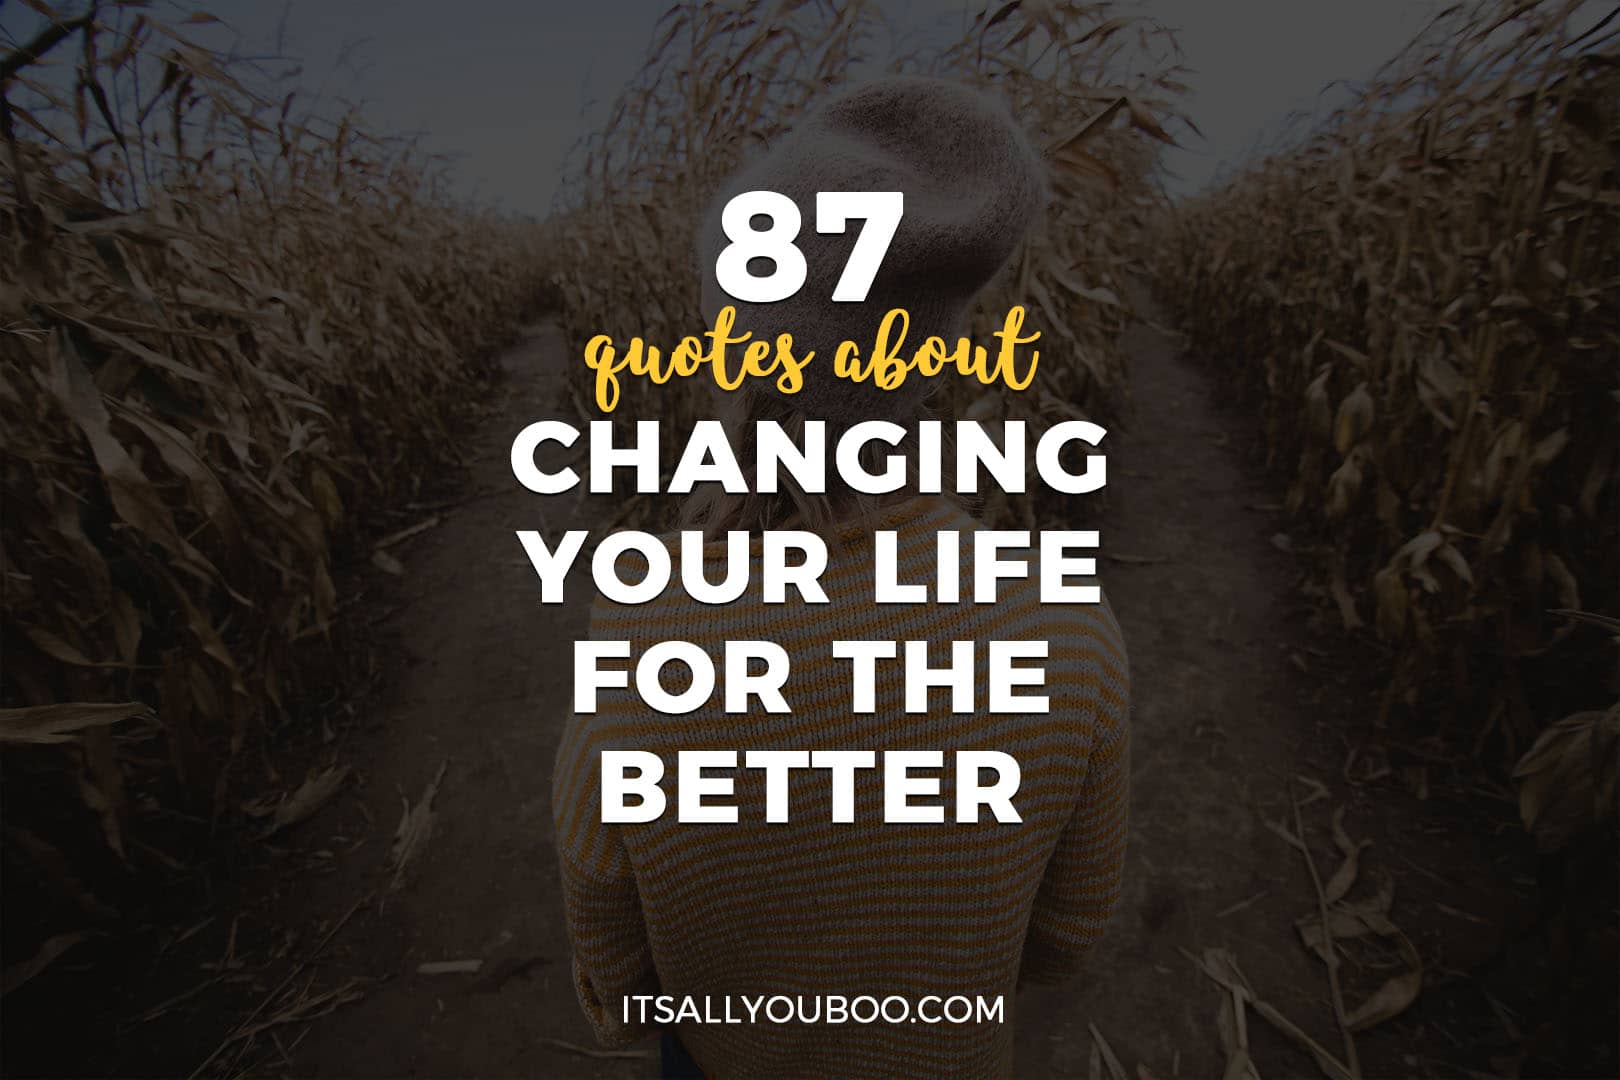 87 Quotes About Changing Your Life for the Better